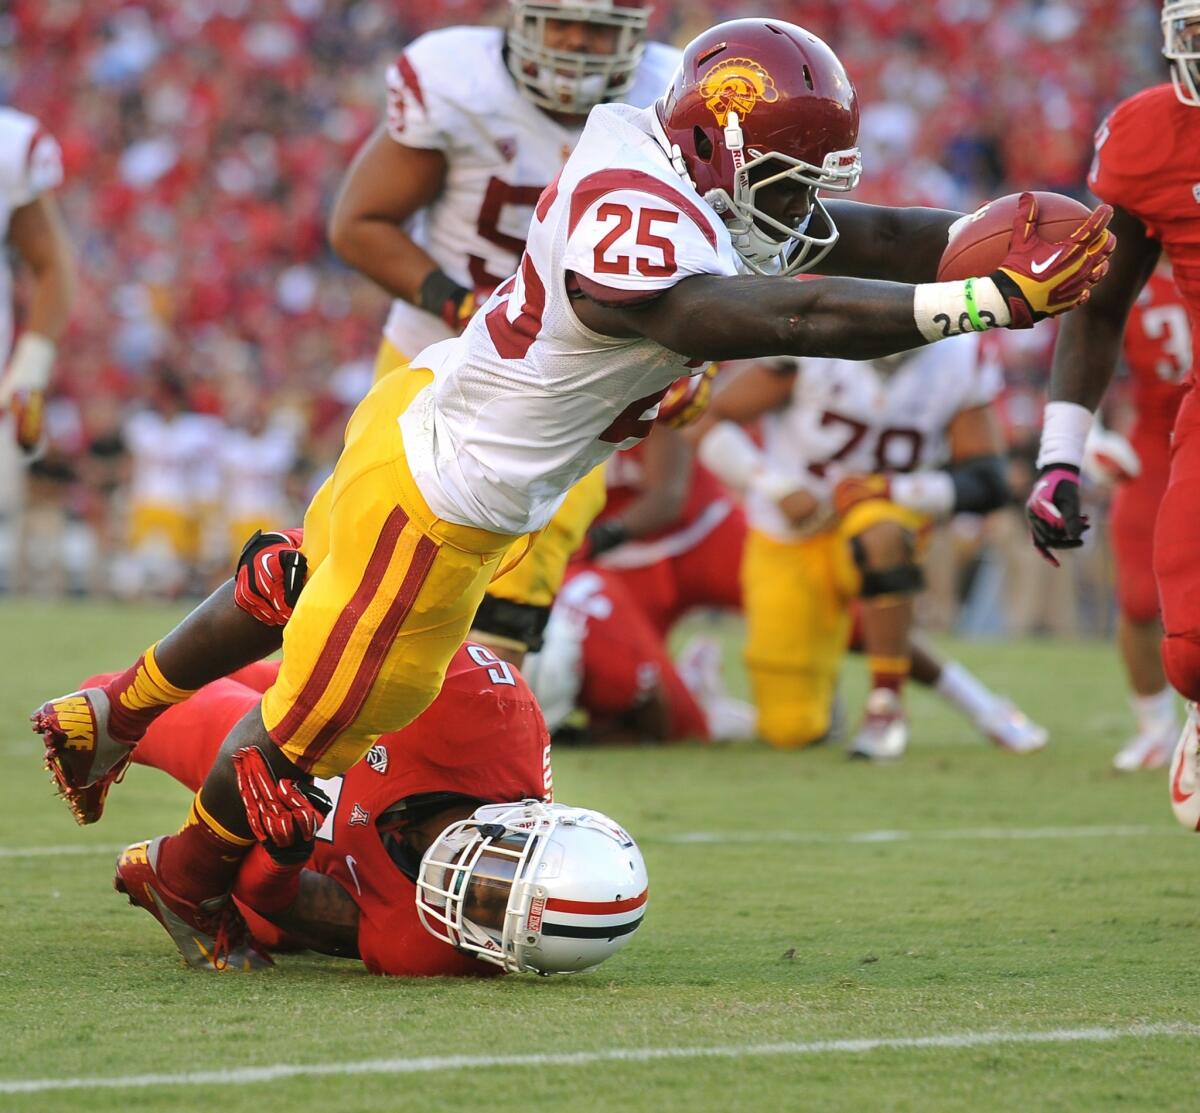 USC running back Silas Redd says he won't play in the Trojans' season opener against Hawaii on Thursday.